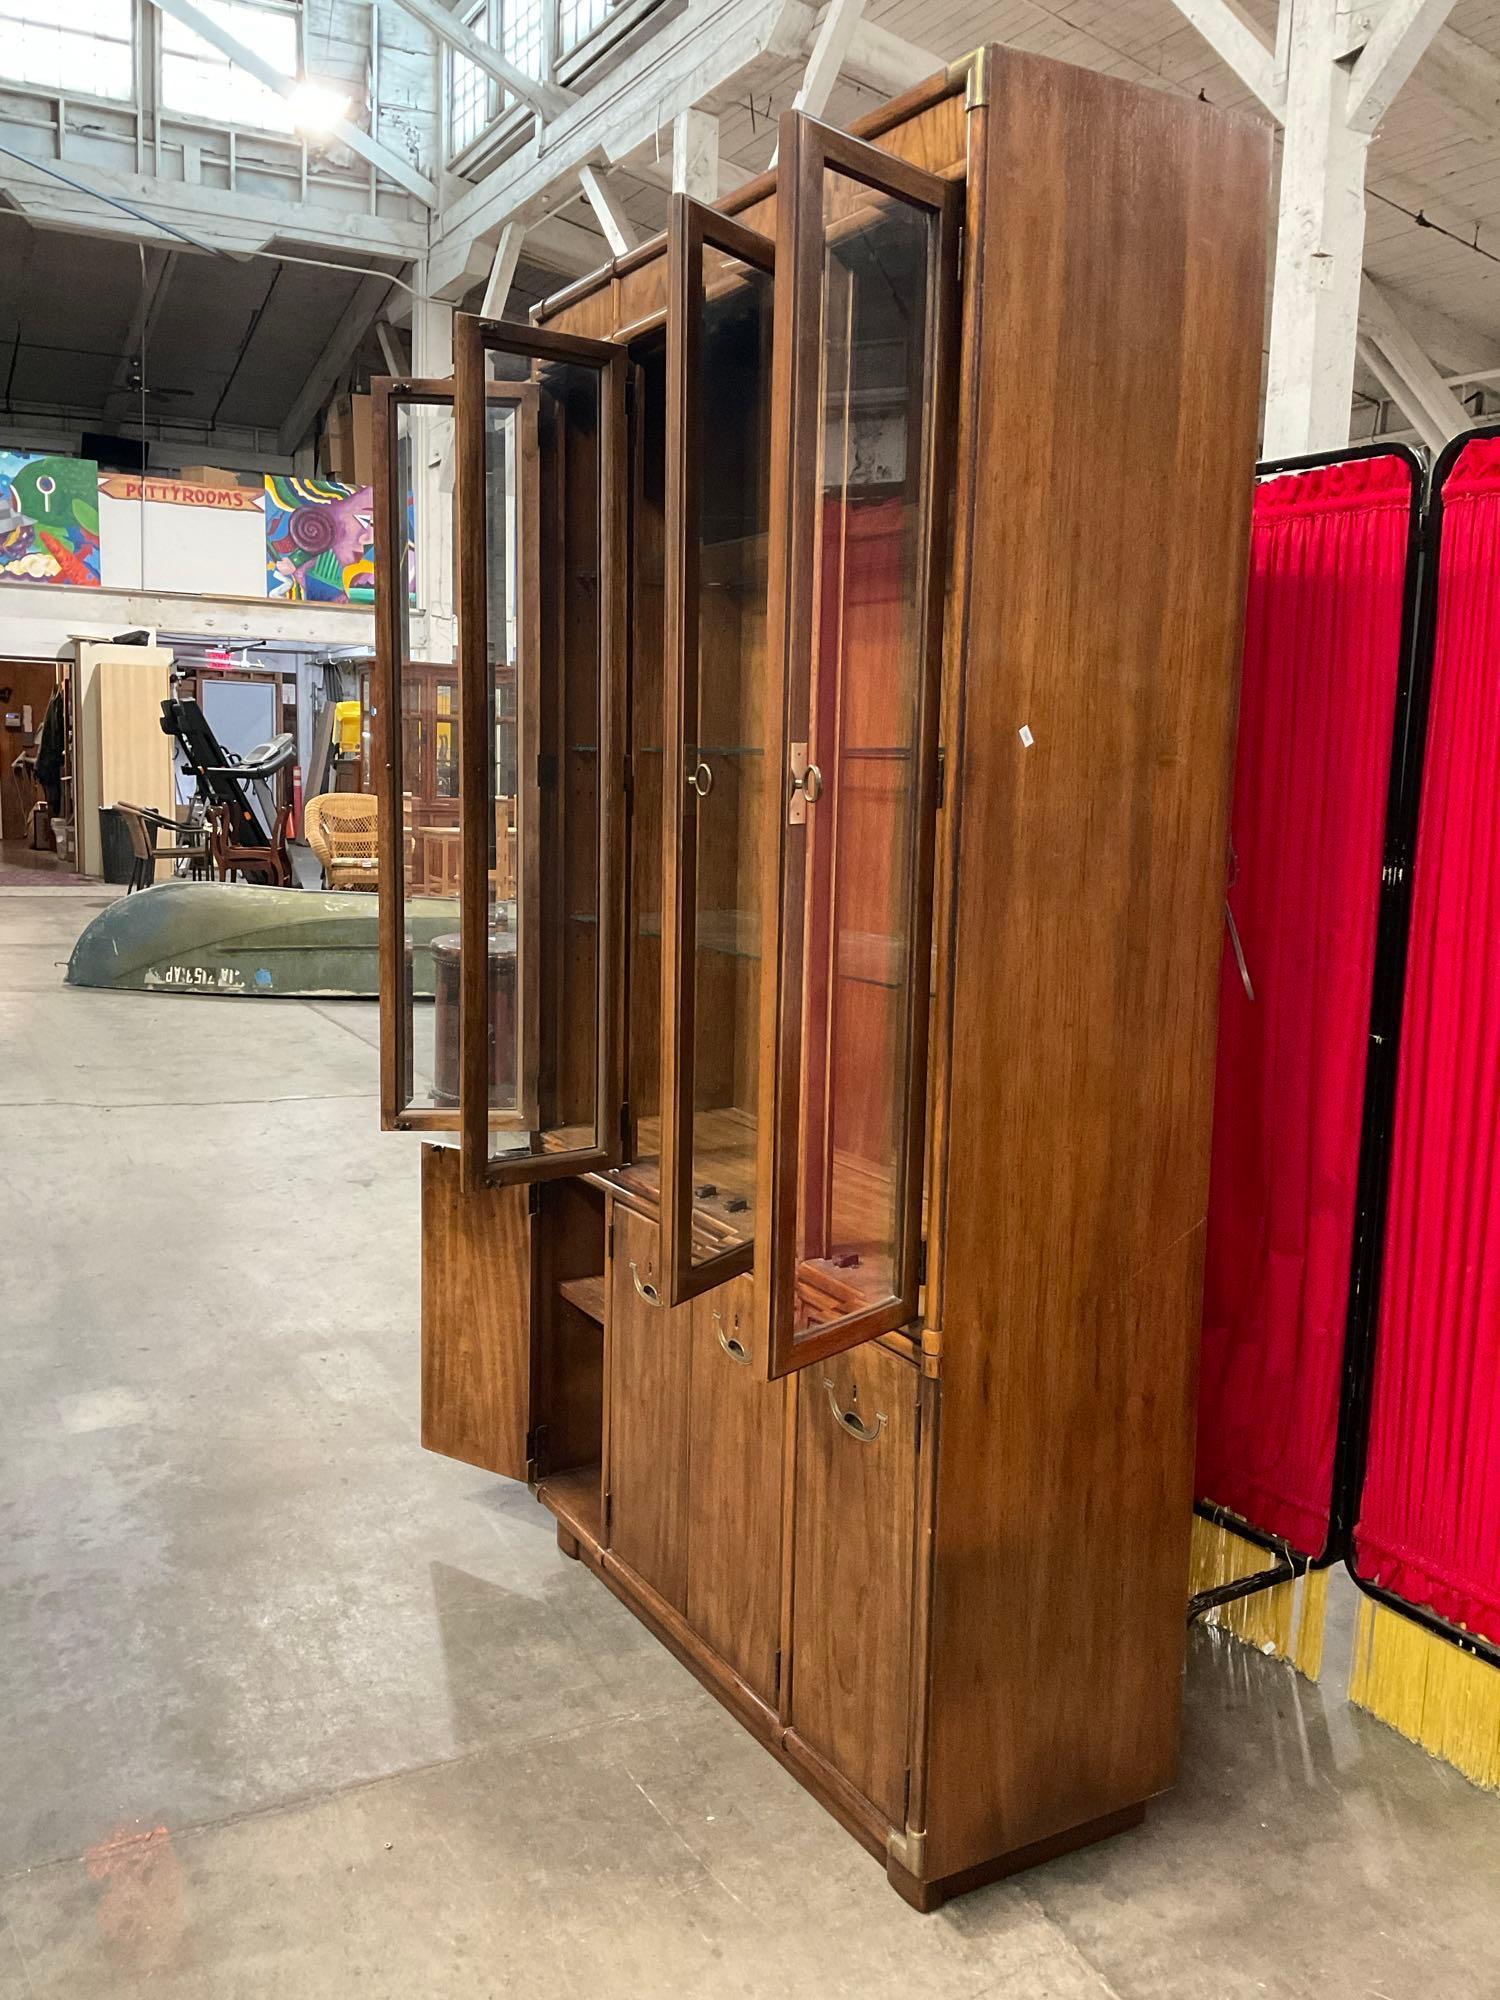 Vintage Drexel Illuminated Wooden Cabinet w/ 3 Glass Shelves & 4 Cupboards. Tested, Works. See pi...